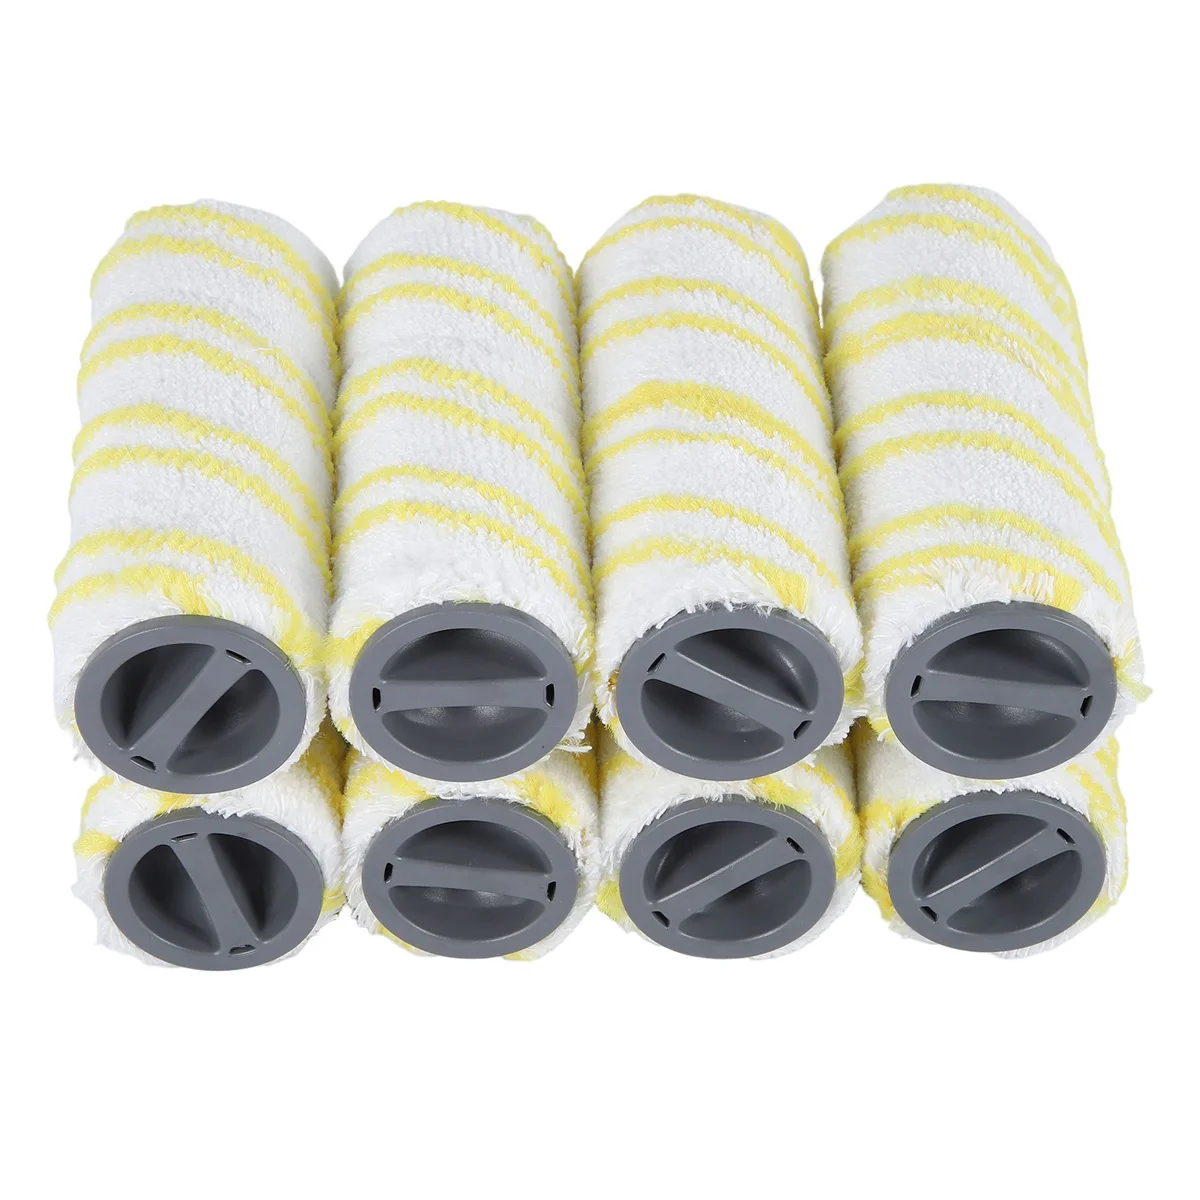 

8 Pcs Roller Brush Replacement Accessories for Karcher FC5 FC7 FC3 FC3D Electric Floor Cleaner